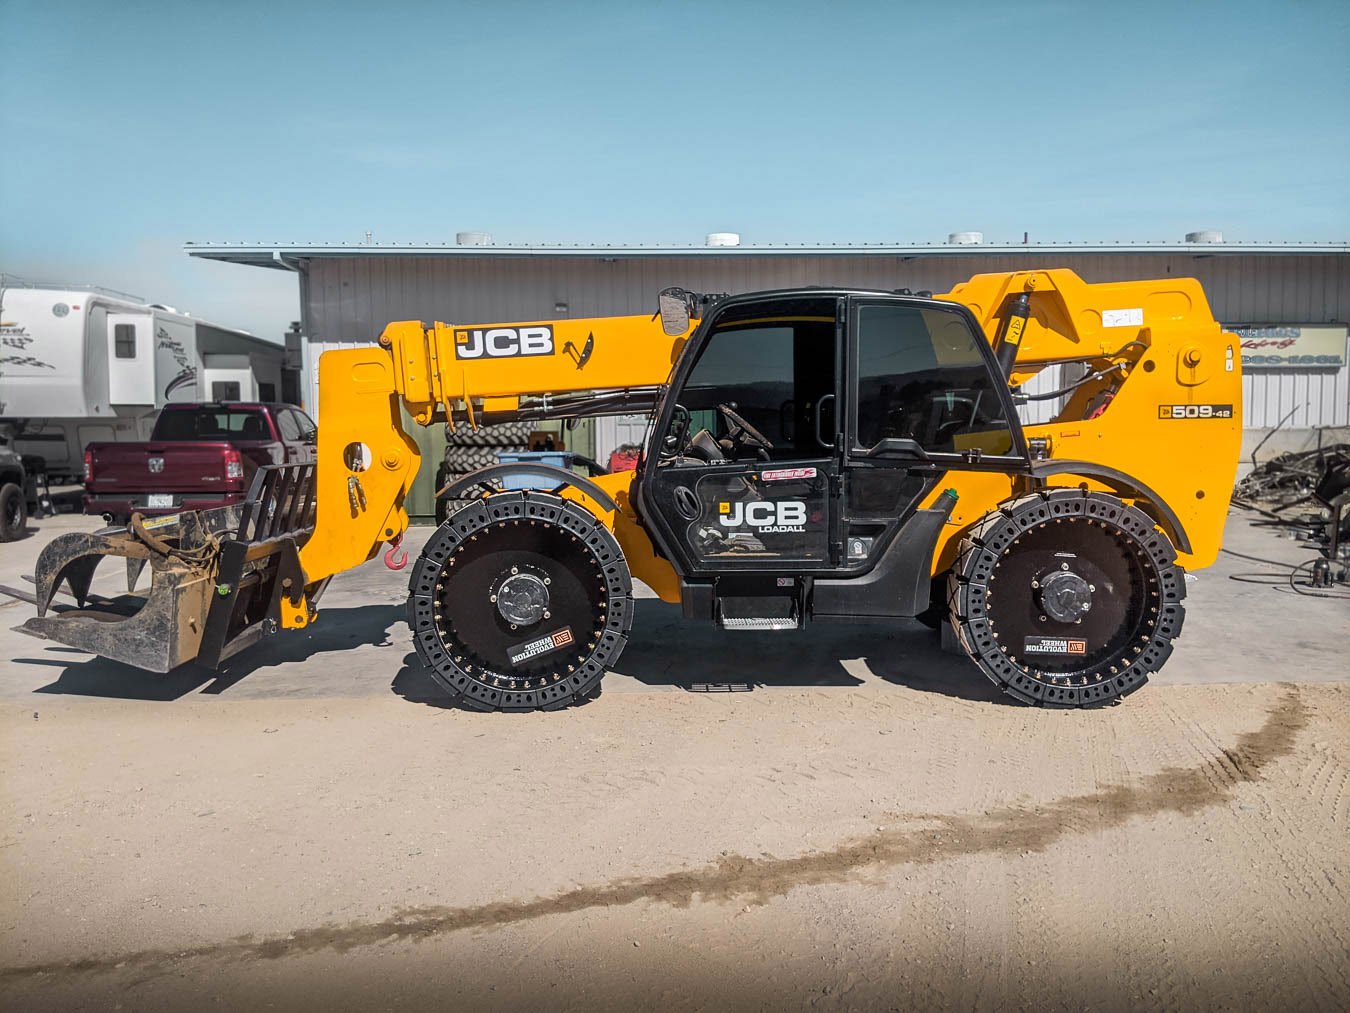 This picture shows solid telehandler tires on a black and yellow JCB telehandler